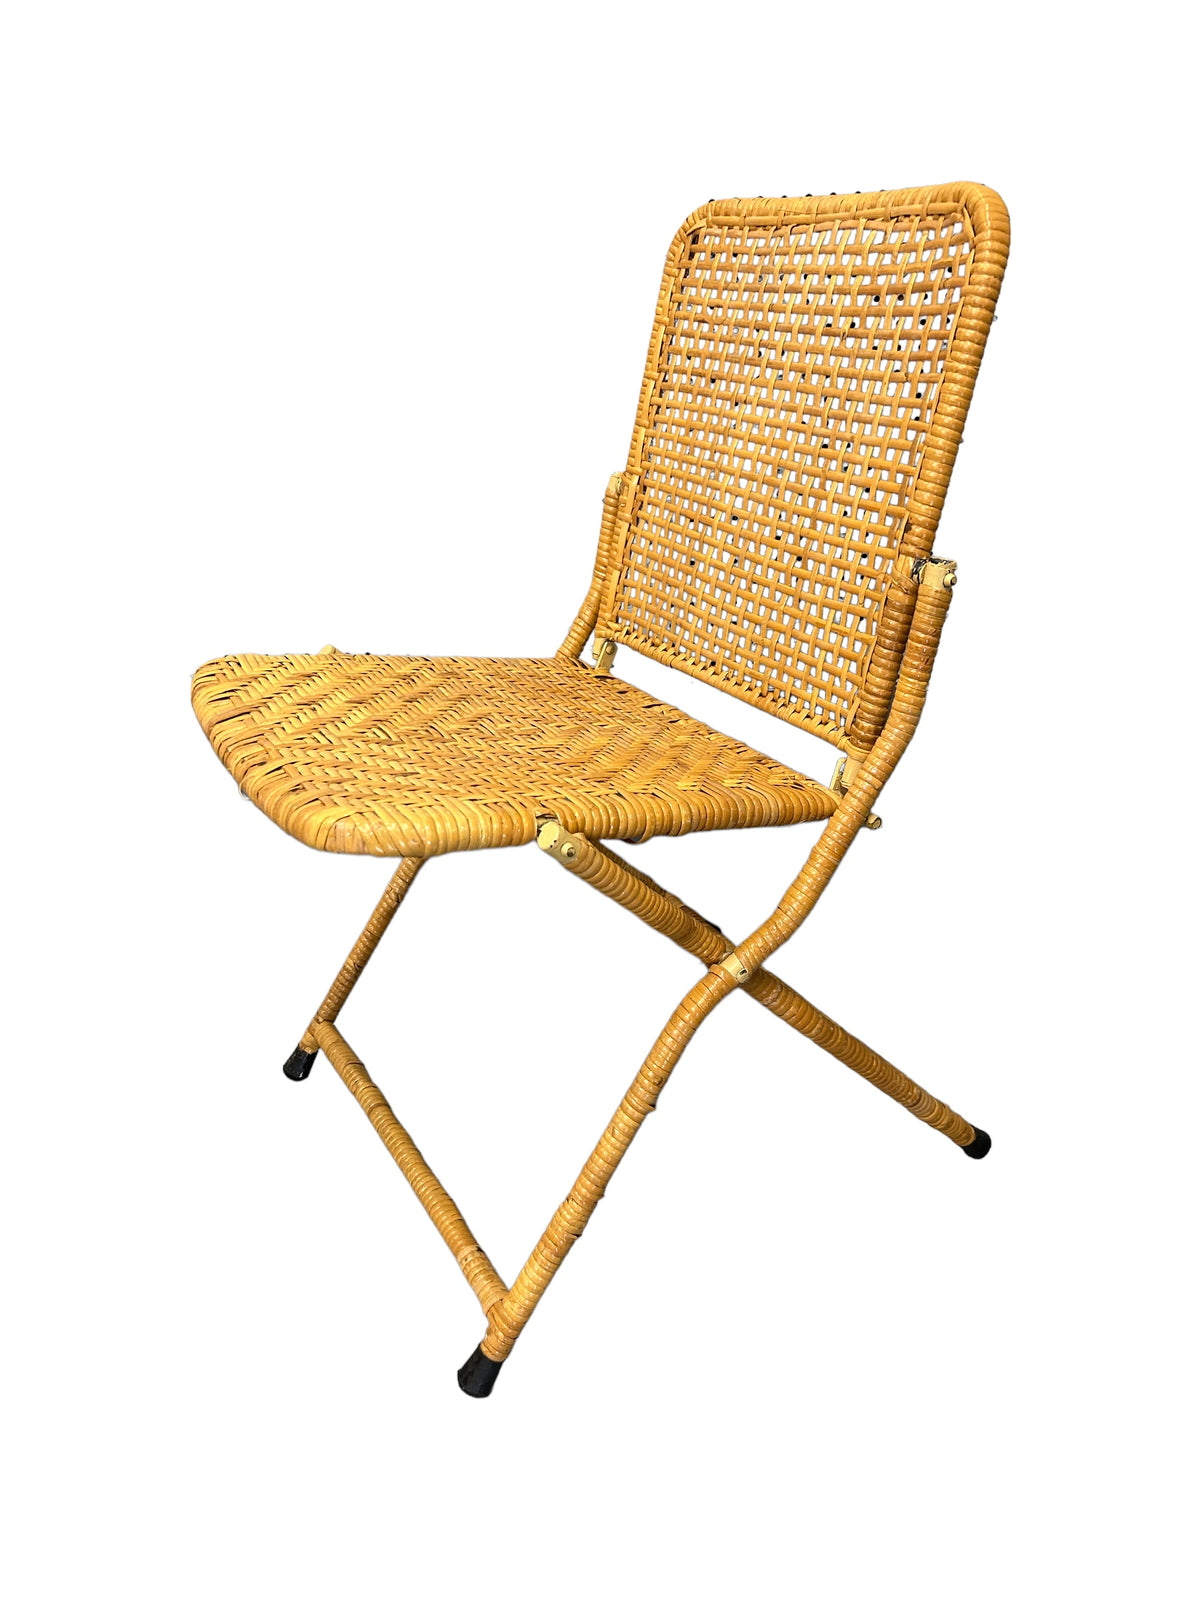 6 Vintage Folding Woven Cane Chairs